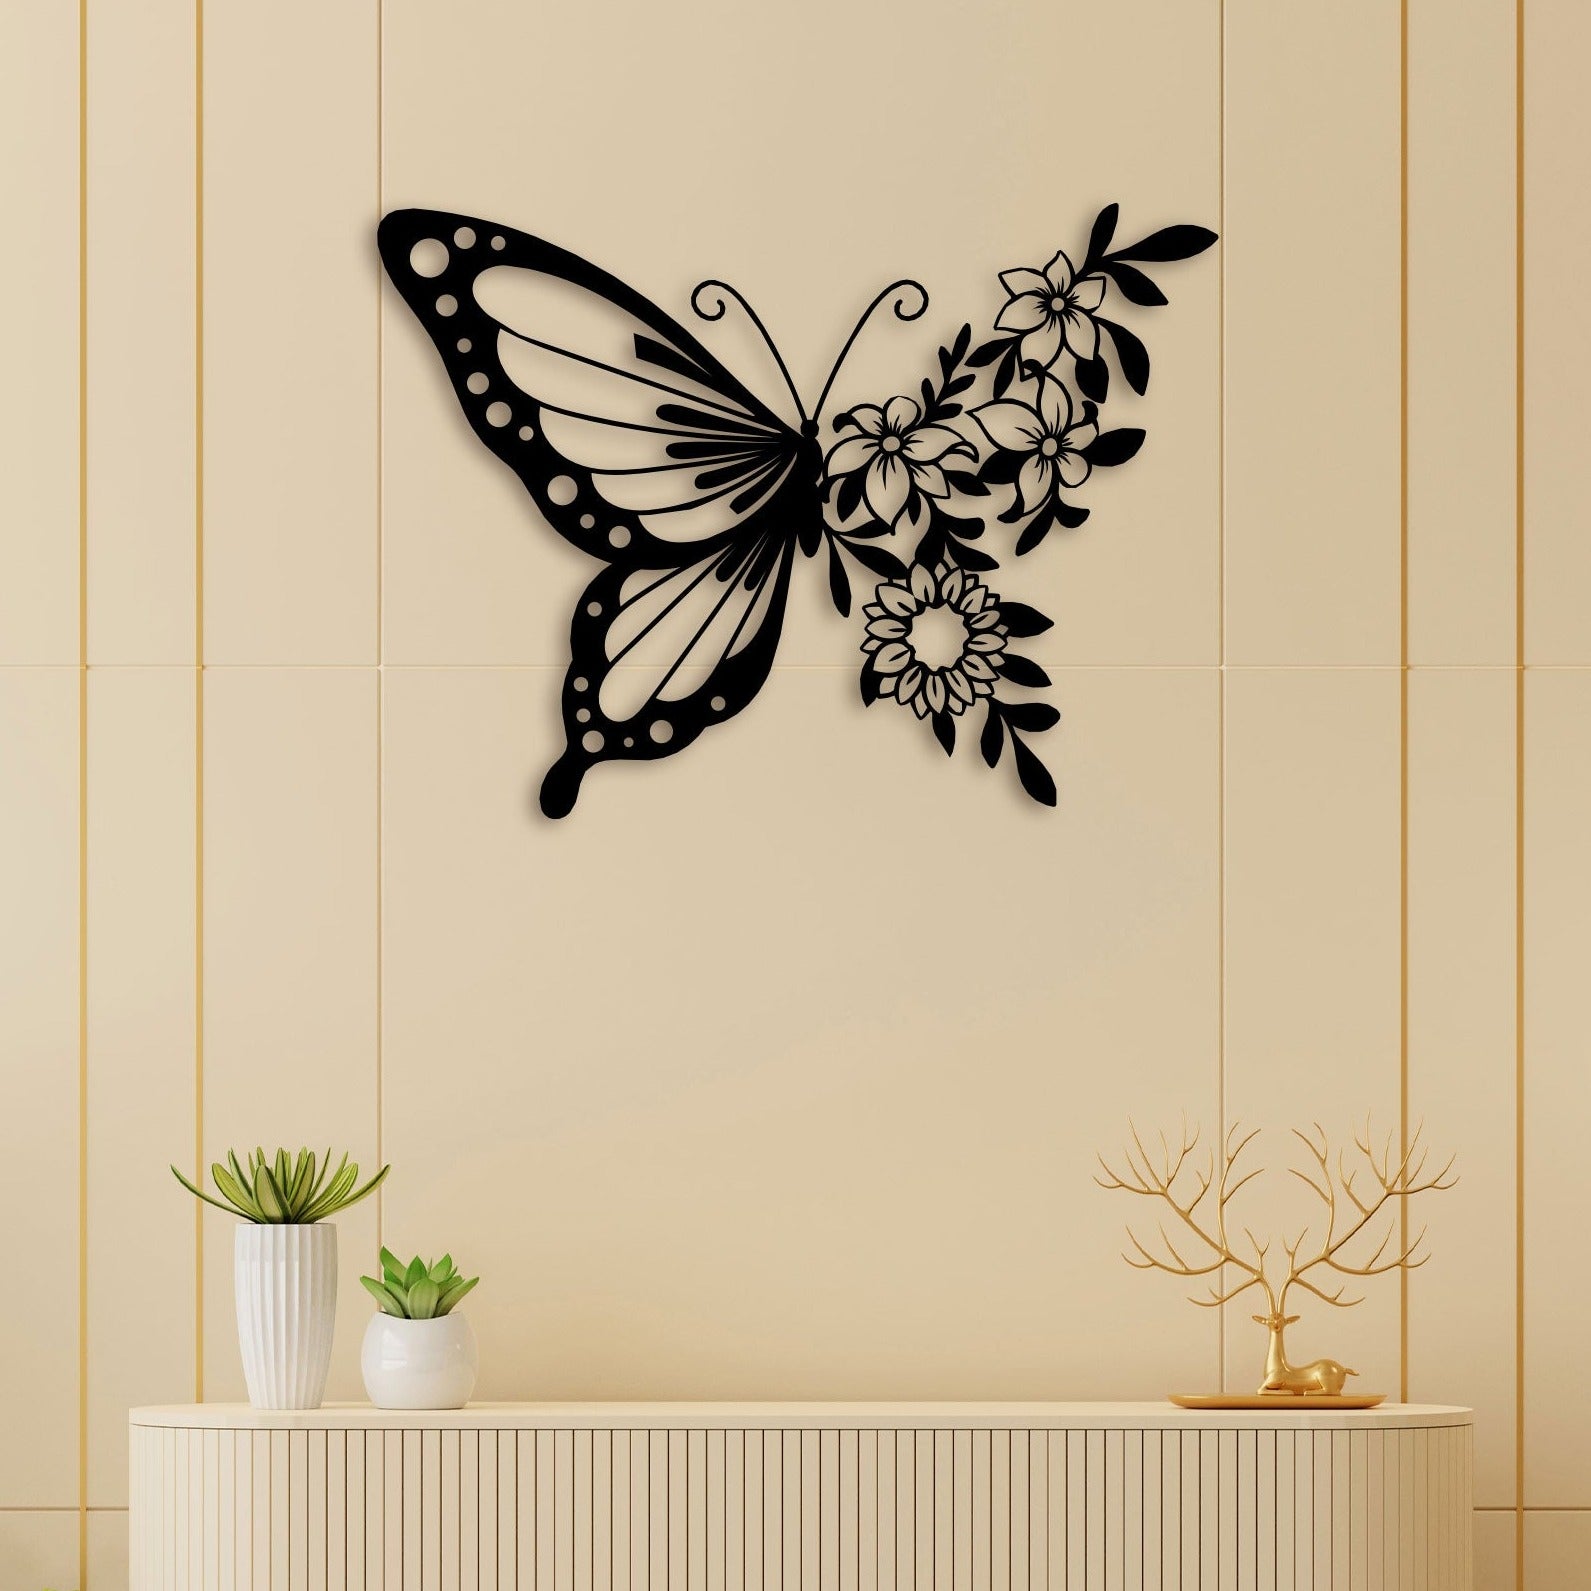 A Collection of Wall Art Ideas to Level Up Your Home | Blog | Square Signs